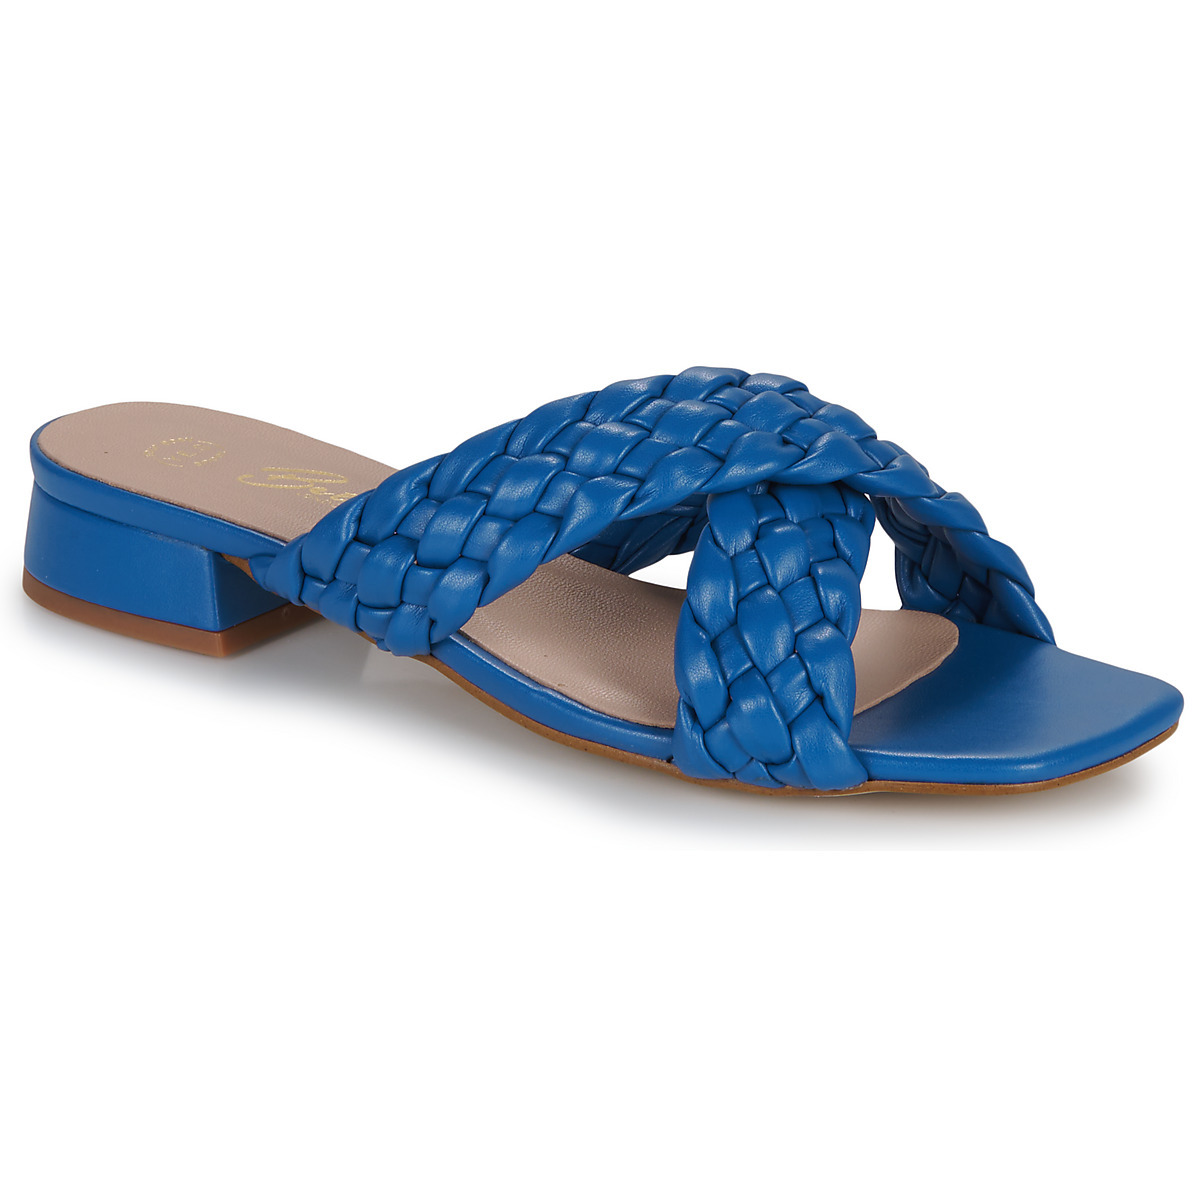 Spartoo Slippers in Blue from Betty London GOOFASH